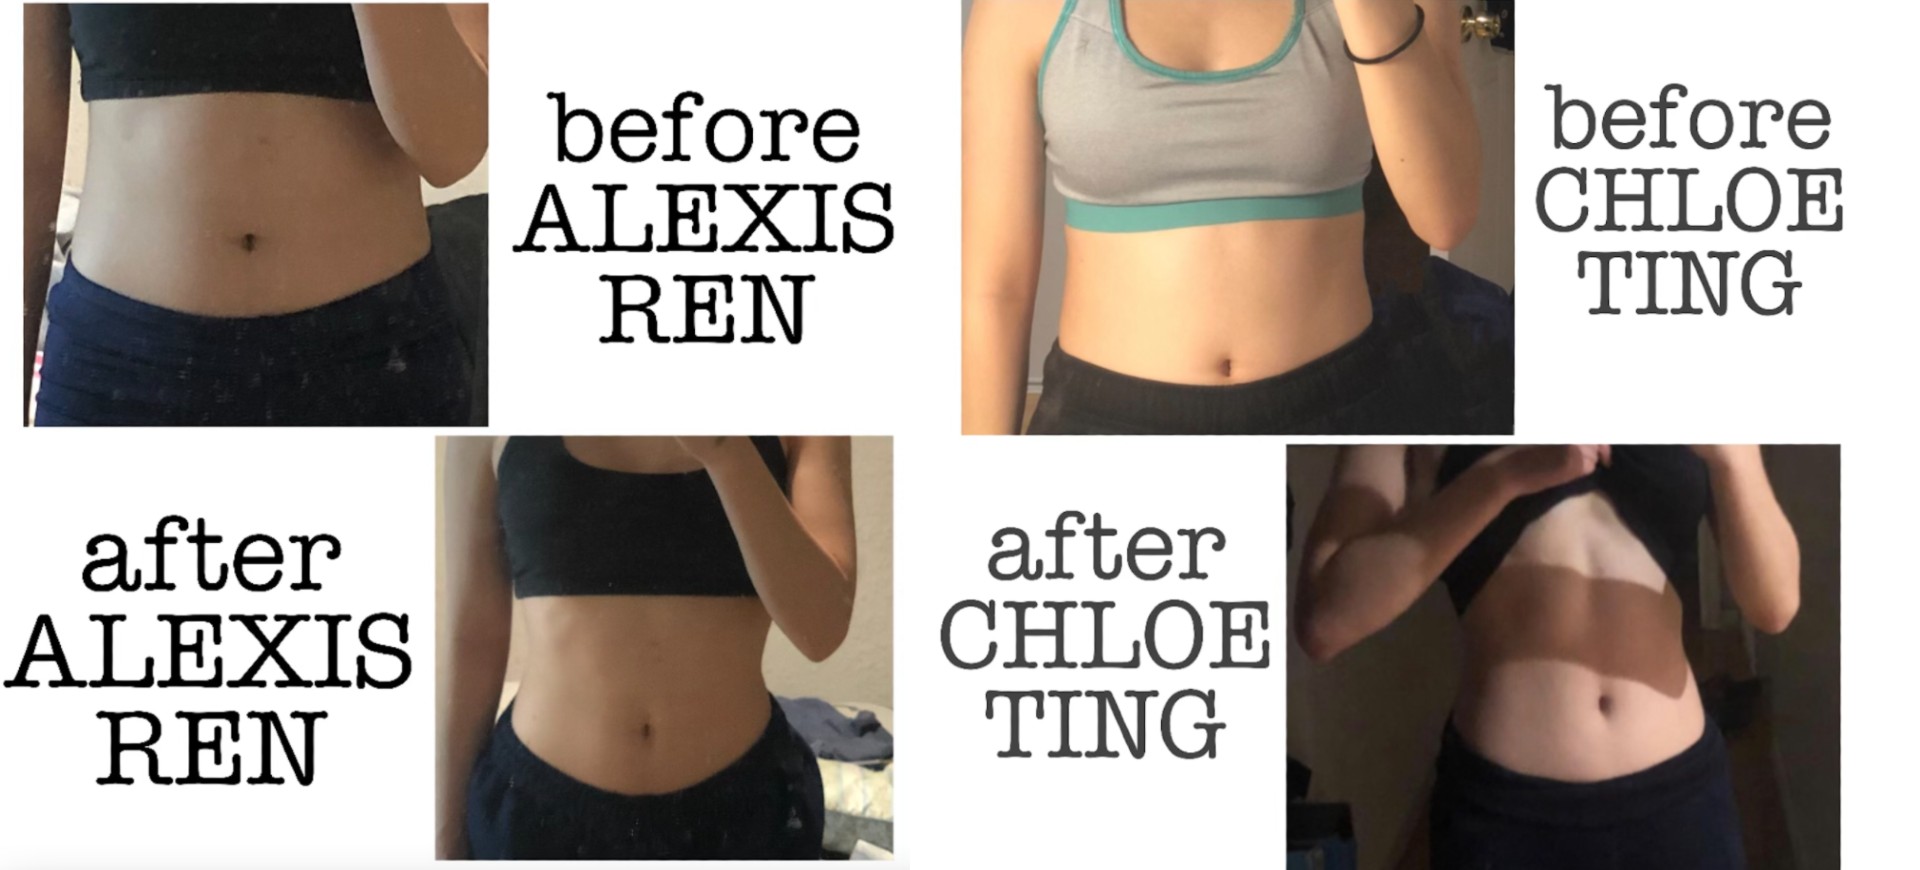 Alexis Ren S Ab Workouts Are